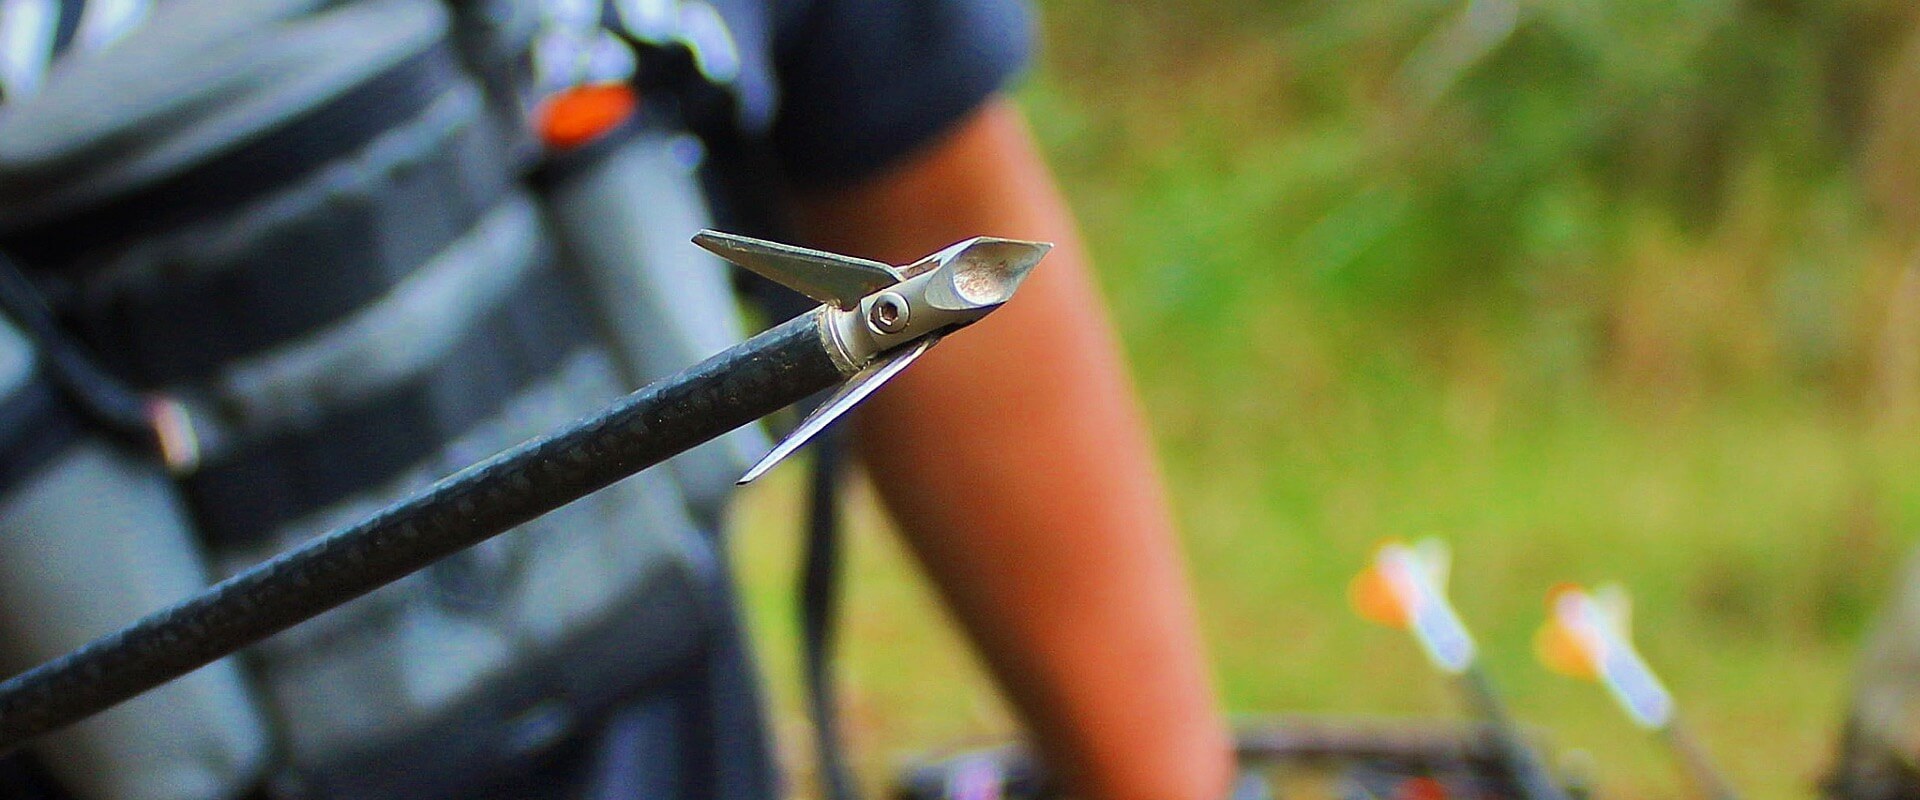 The most accurate, deepest penetrating fixed blade broadhead